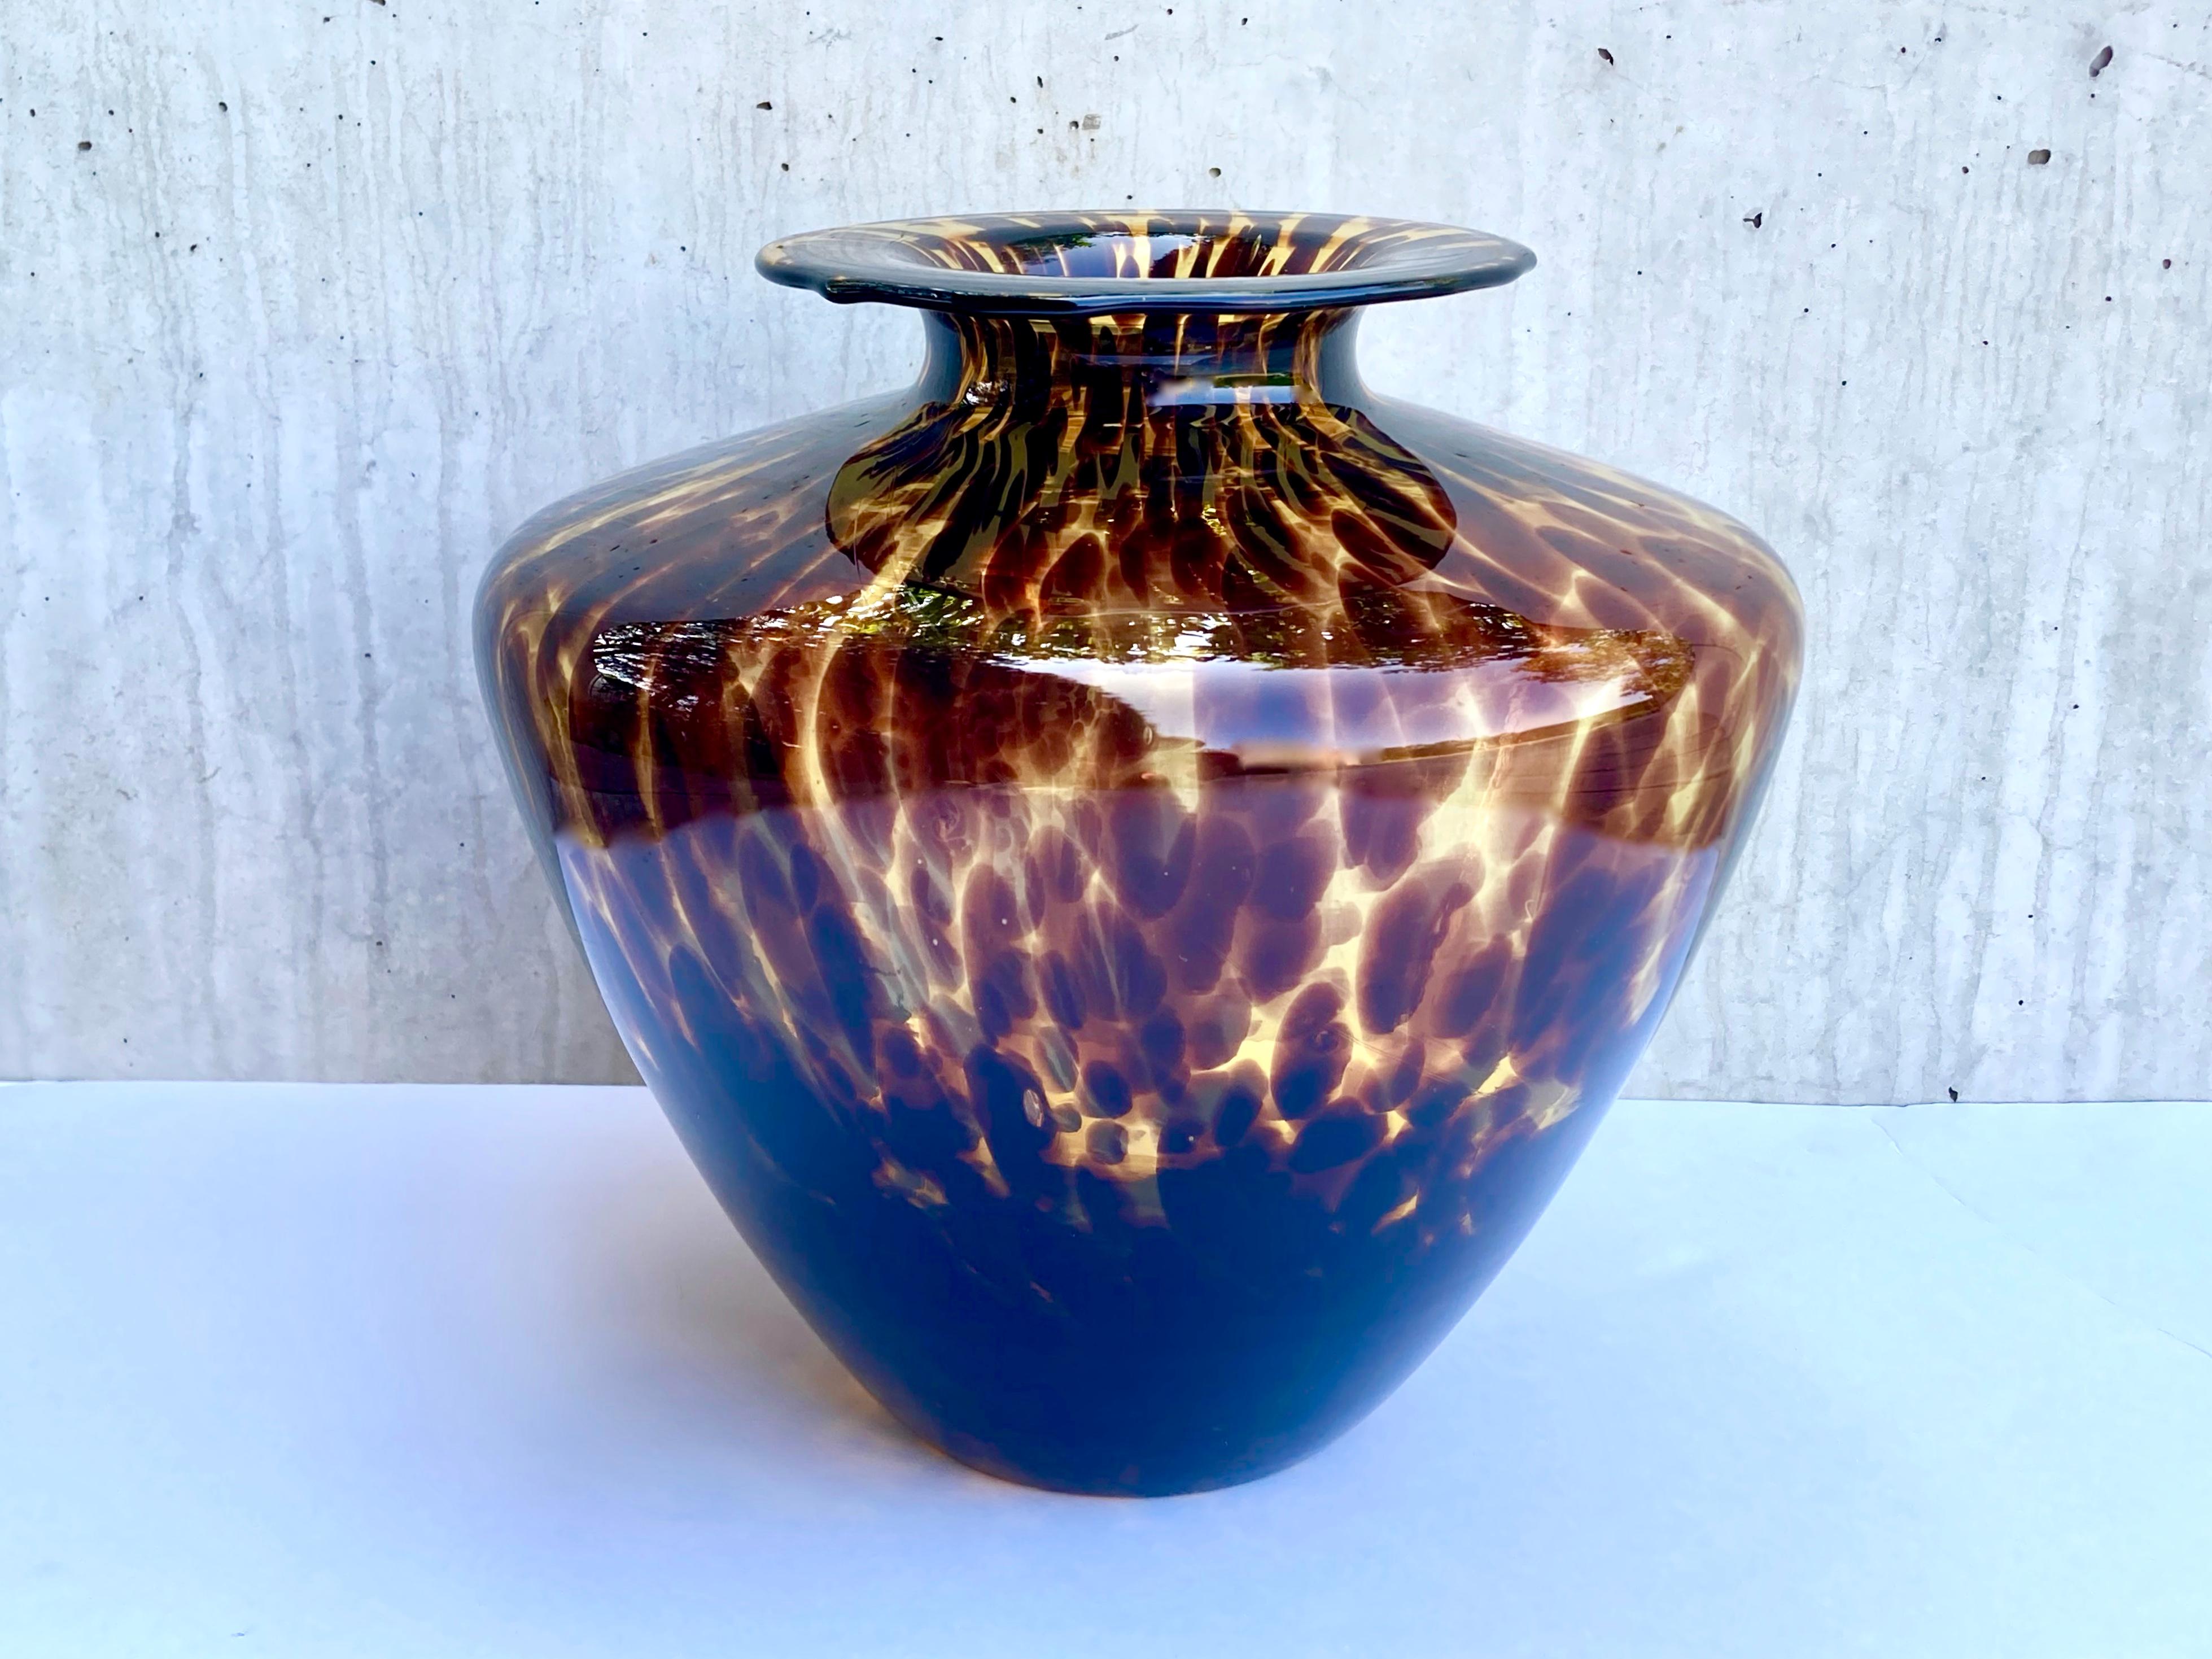 A French-Italian cooperation. This very impressive, hand blown Murano glass vase was made for the French luxury brand Lancel (the vase still features the original label, see photo of the rim). The vase is made in a so called tortoise shell pattern